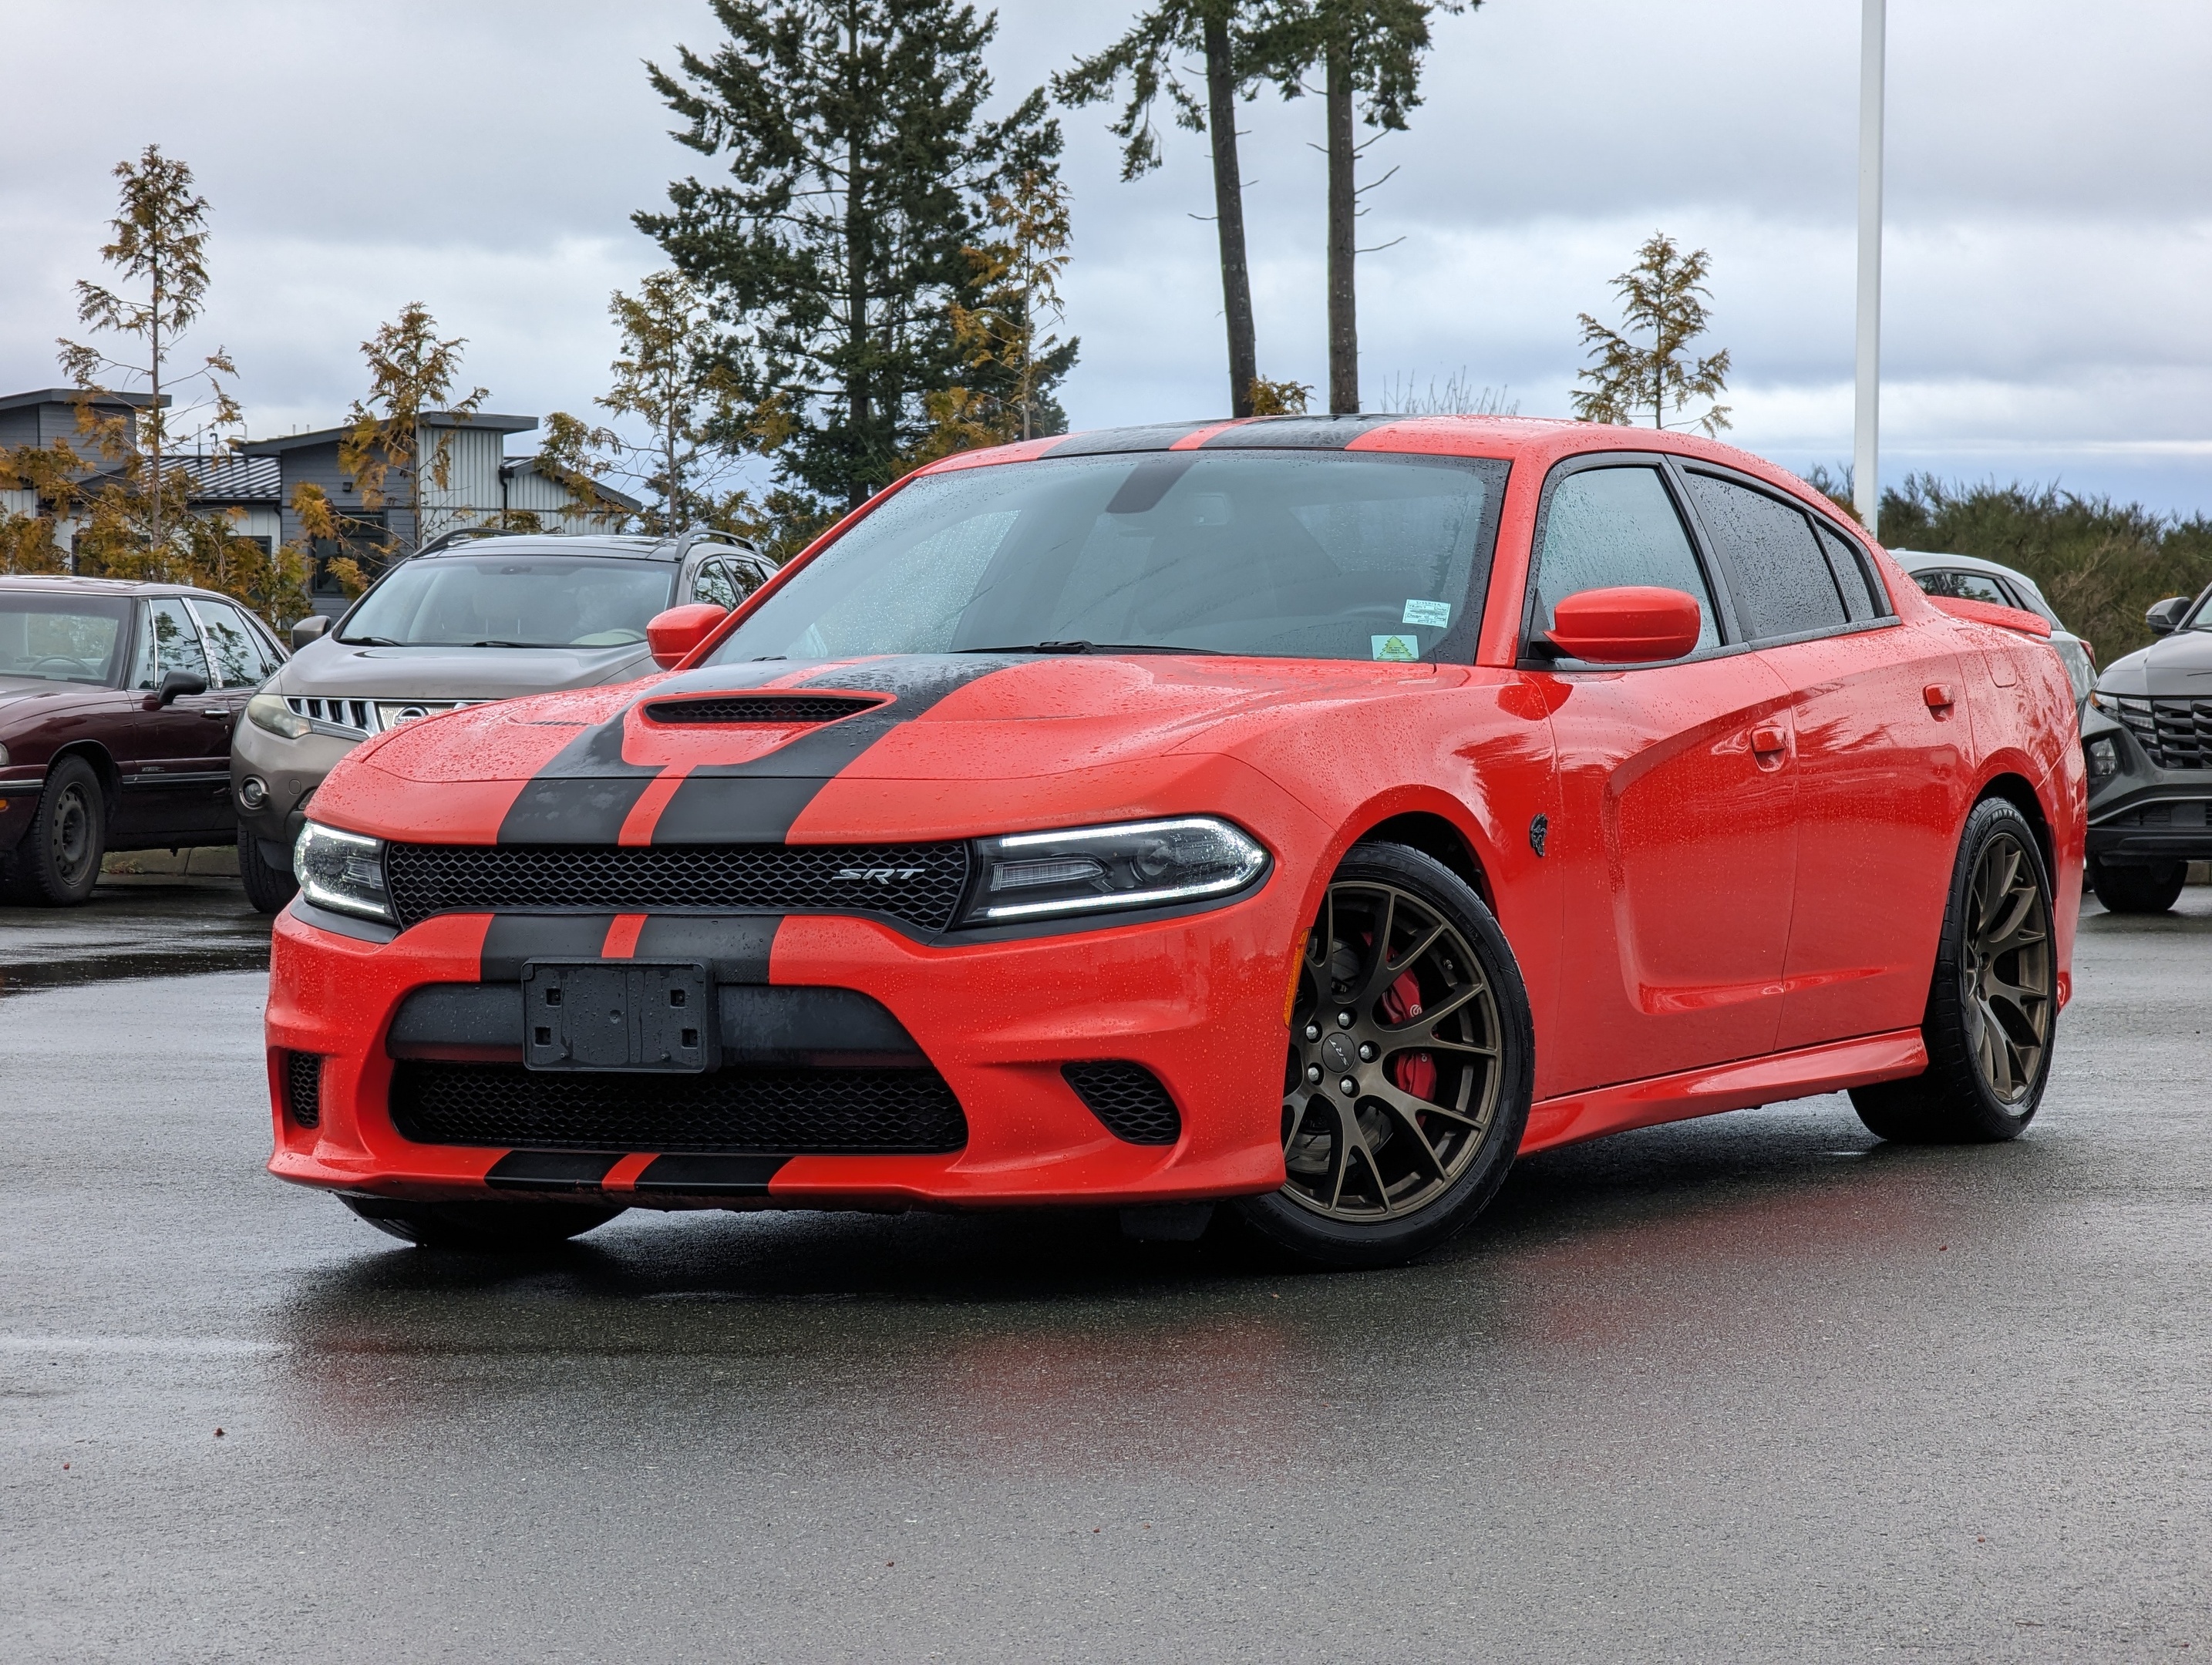 2017 Dodge Charger Hellcat - Navigation, Heated/Vented Seats